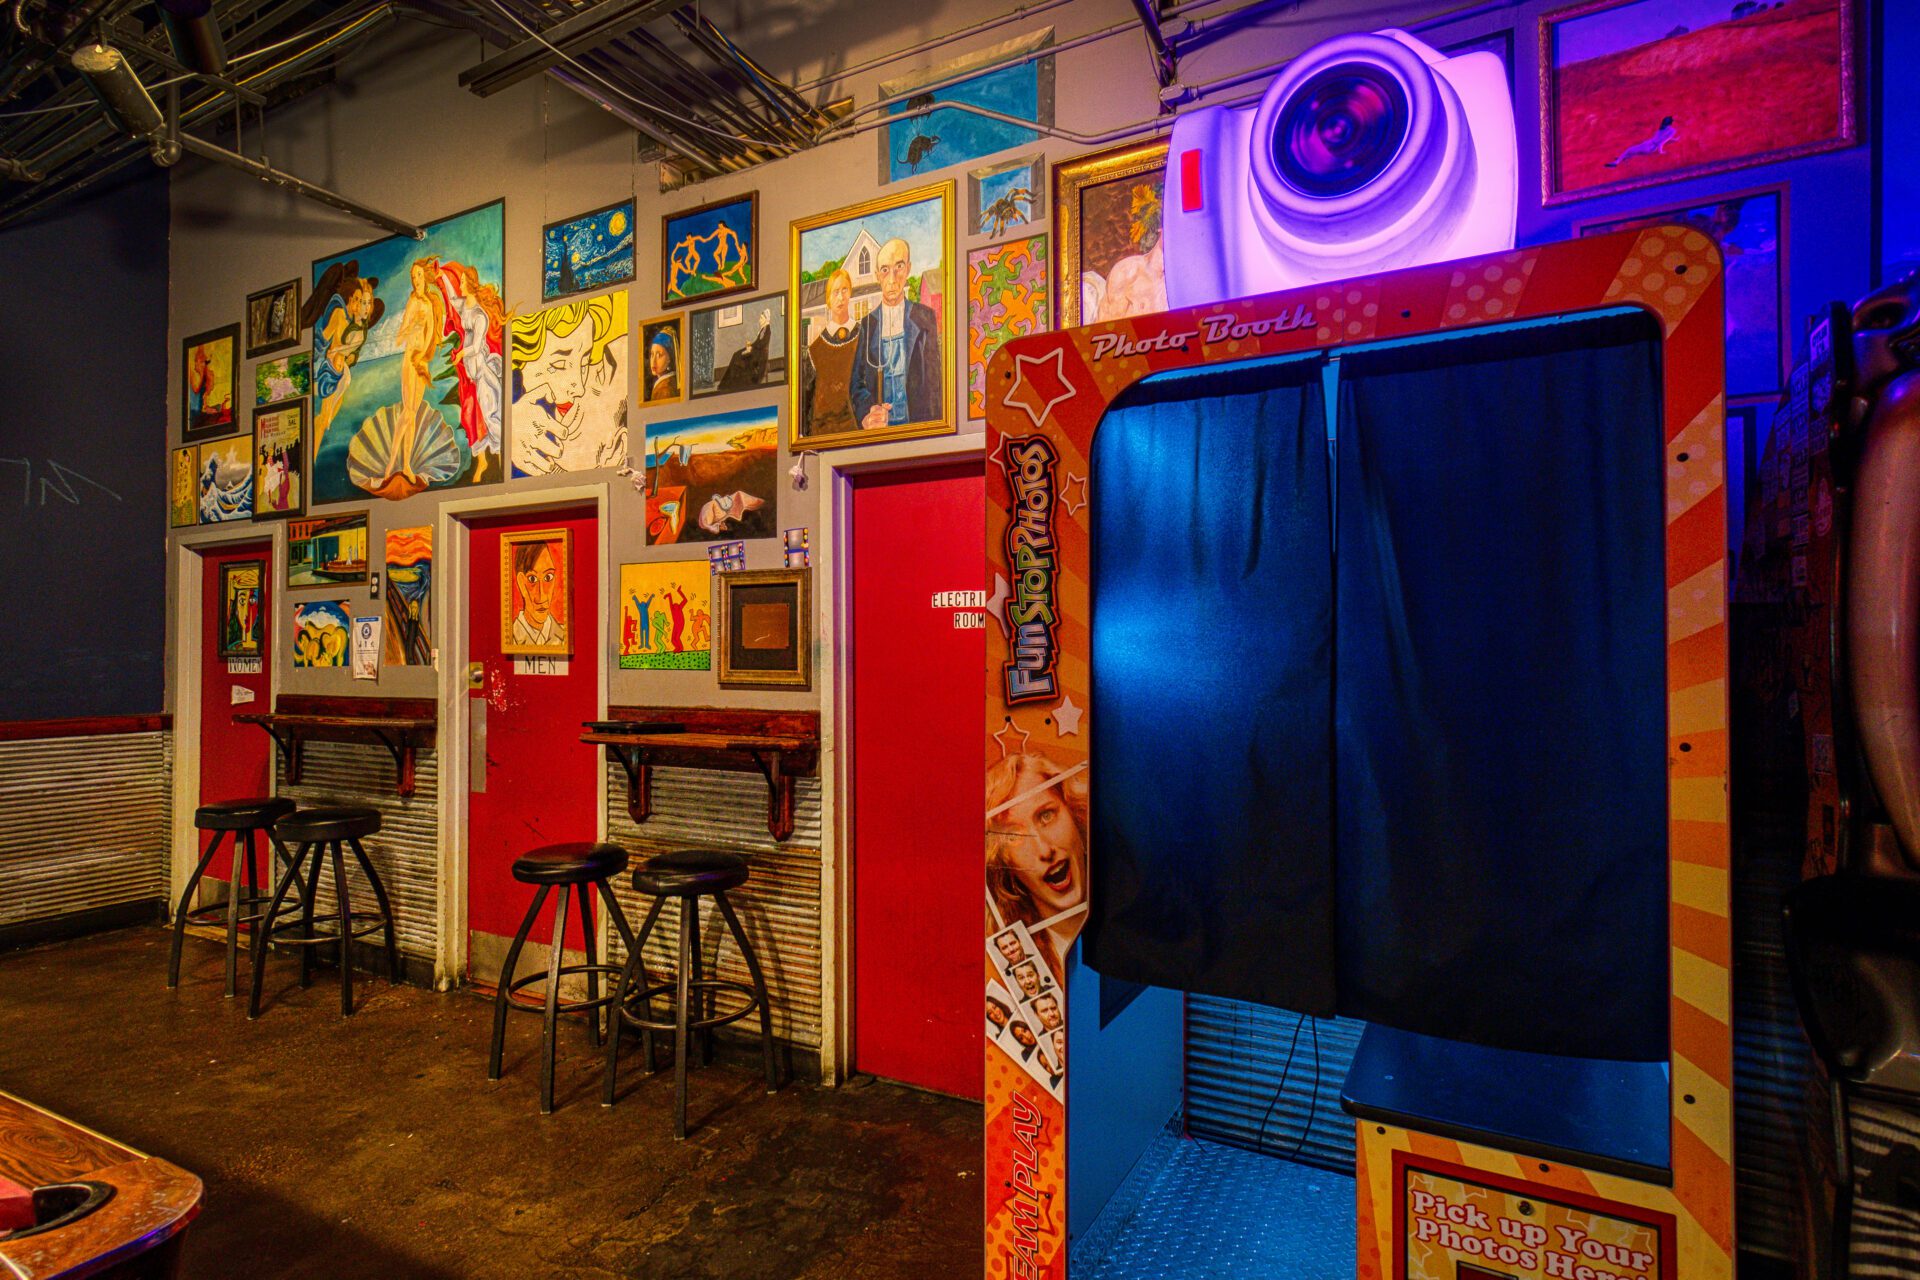 photo booth next to barstools and tables